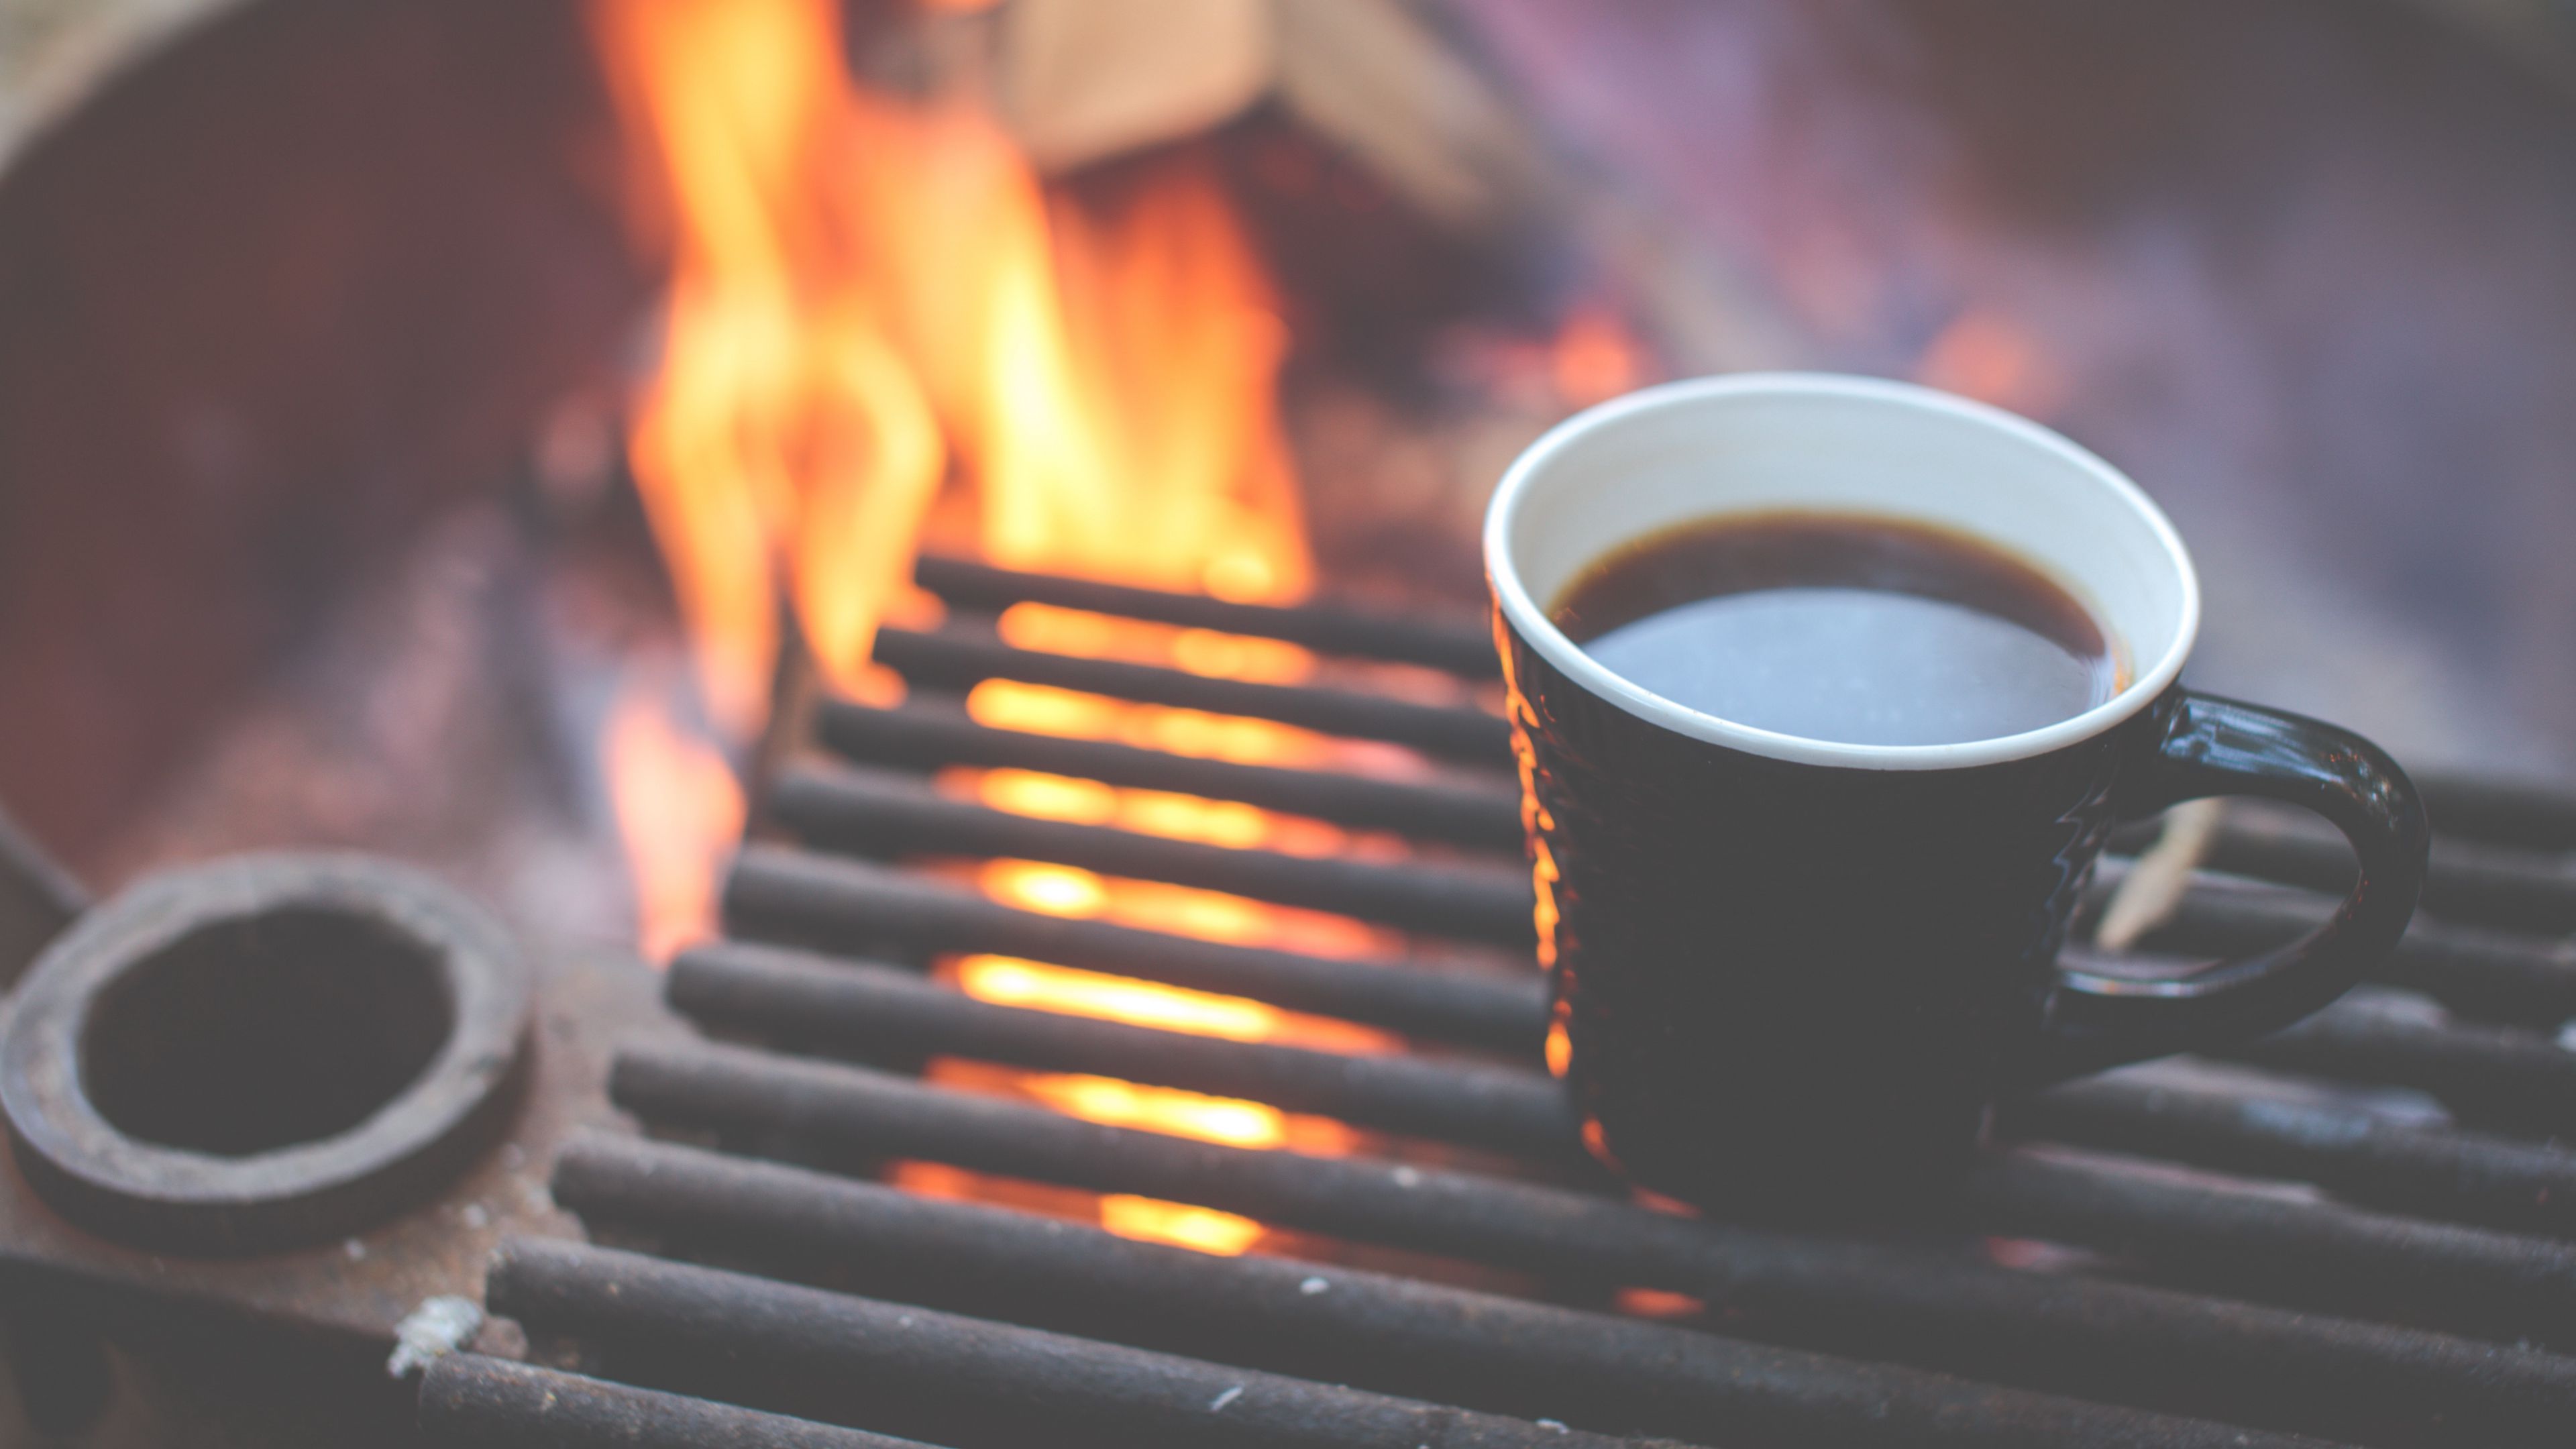 Download wallpaper 3840x2160 coffee, grill, cup 4k uhd 16:9 hd background